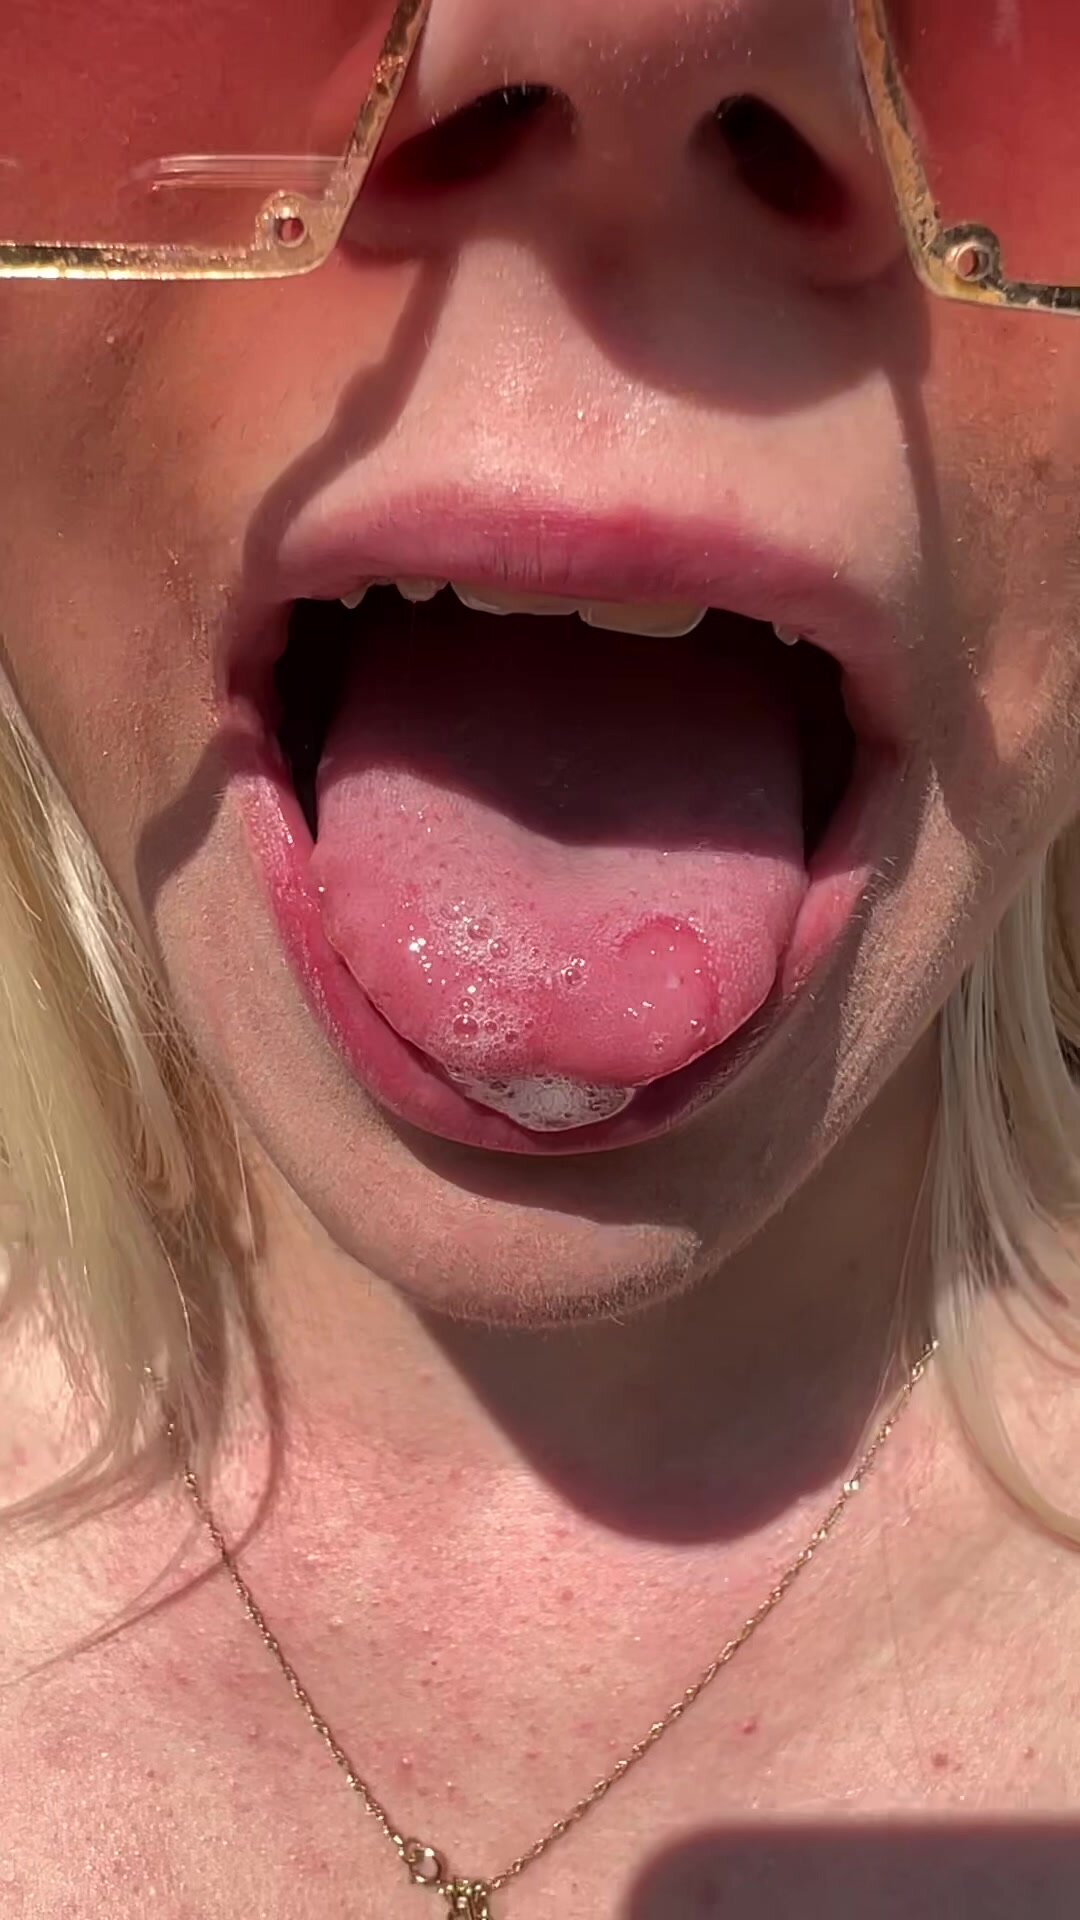 Teen is showing you her wet mouth tongue and throat